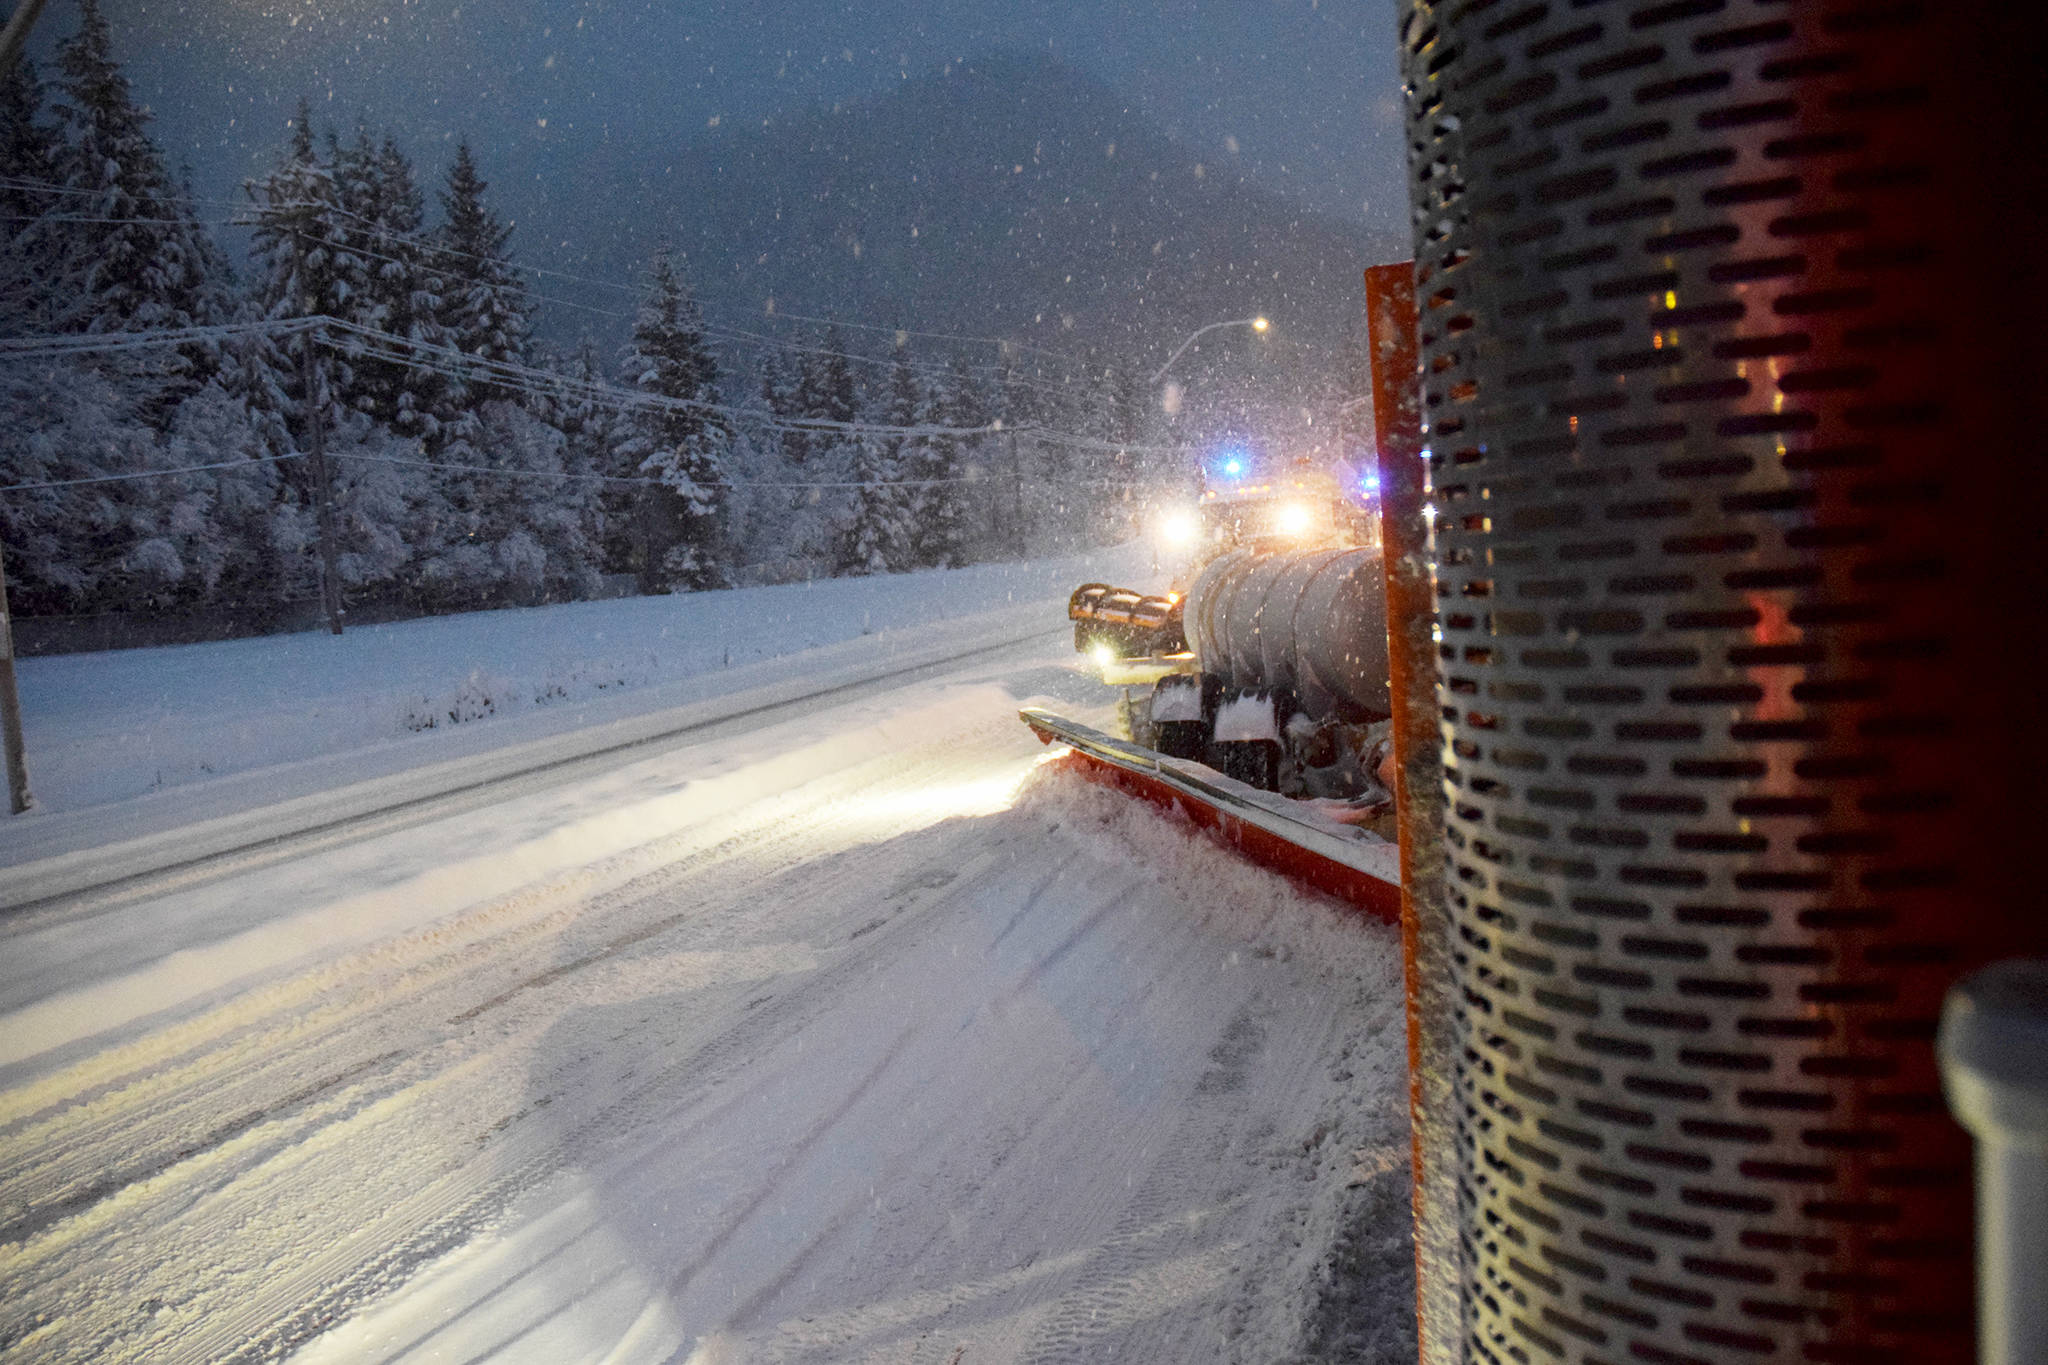 The Department of Transportation and Public Facilities tow plow clears snow from two lanes at once on Thursday Jan. 10. (Mollie Barnes | Juneau Empire)